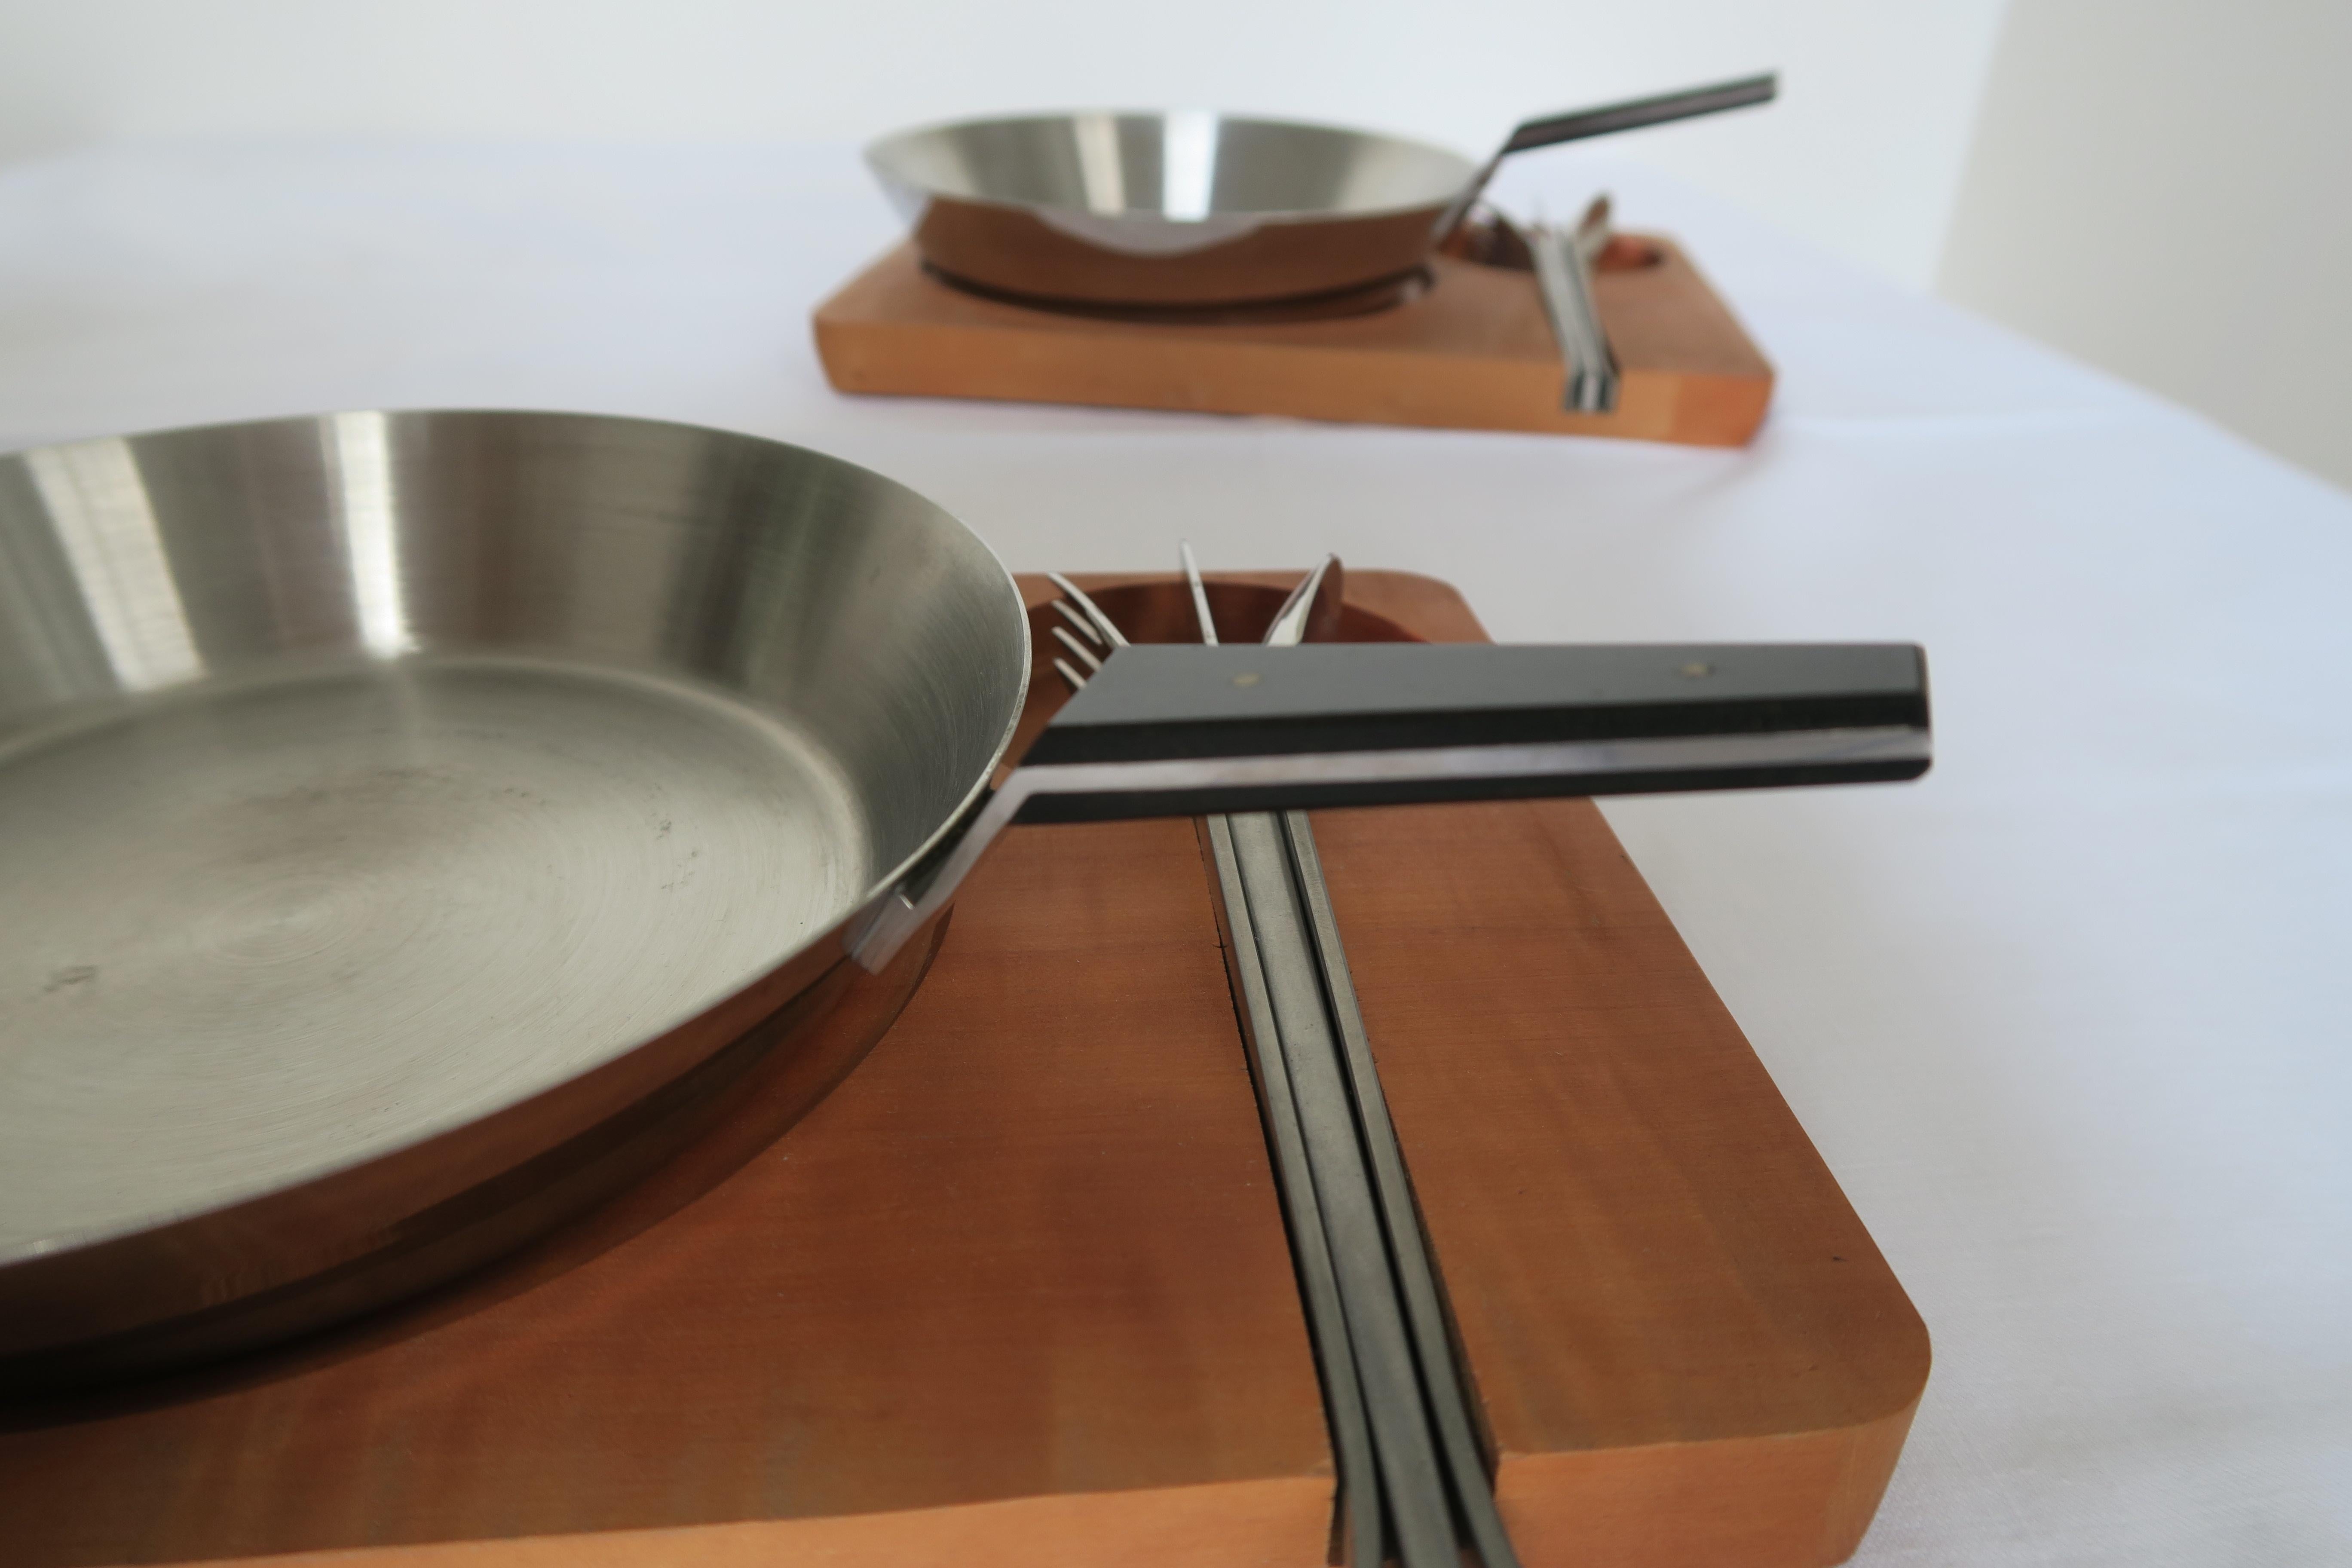 These two dining sets were designed and executed by the Austrian Werkstätte Carl Auböck. They date back to the 1950s and were crafted using the finest materials. In this case the trays are made of medium-dark wood, pans and cutlery are made of